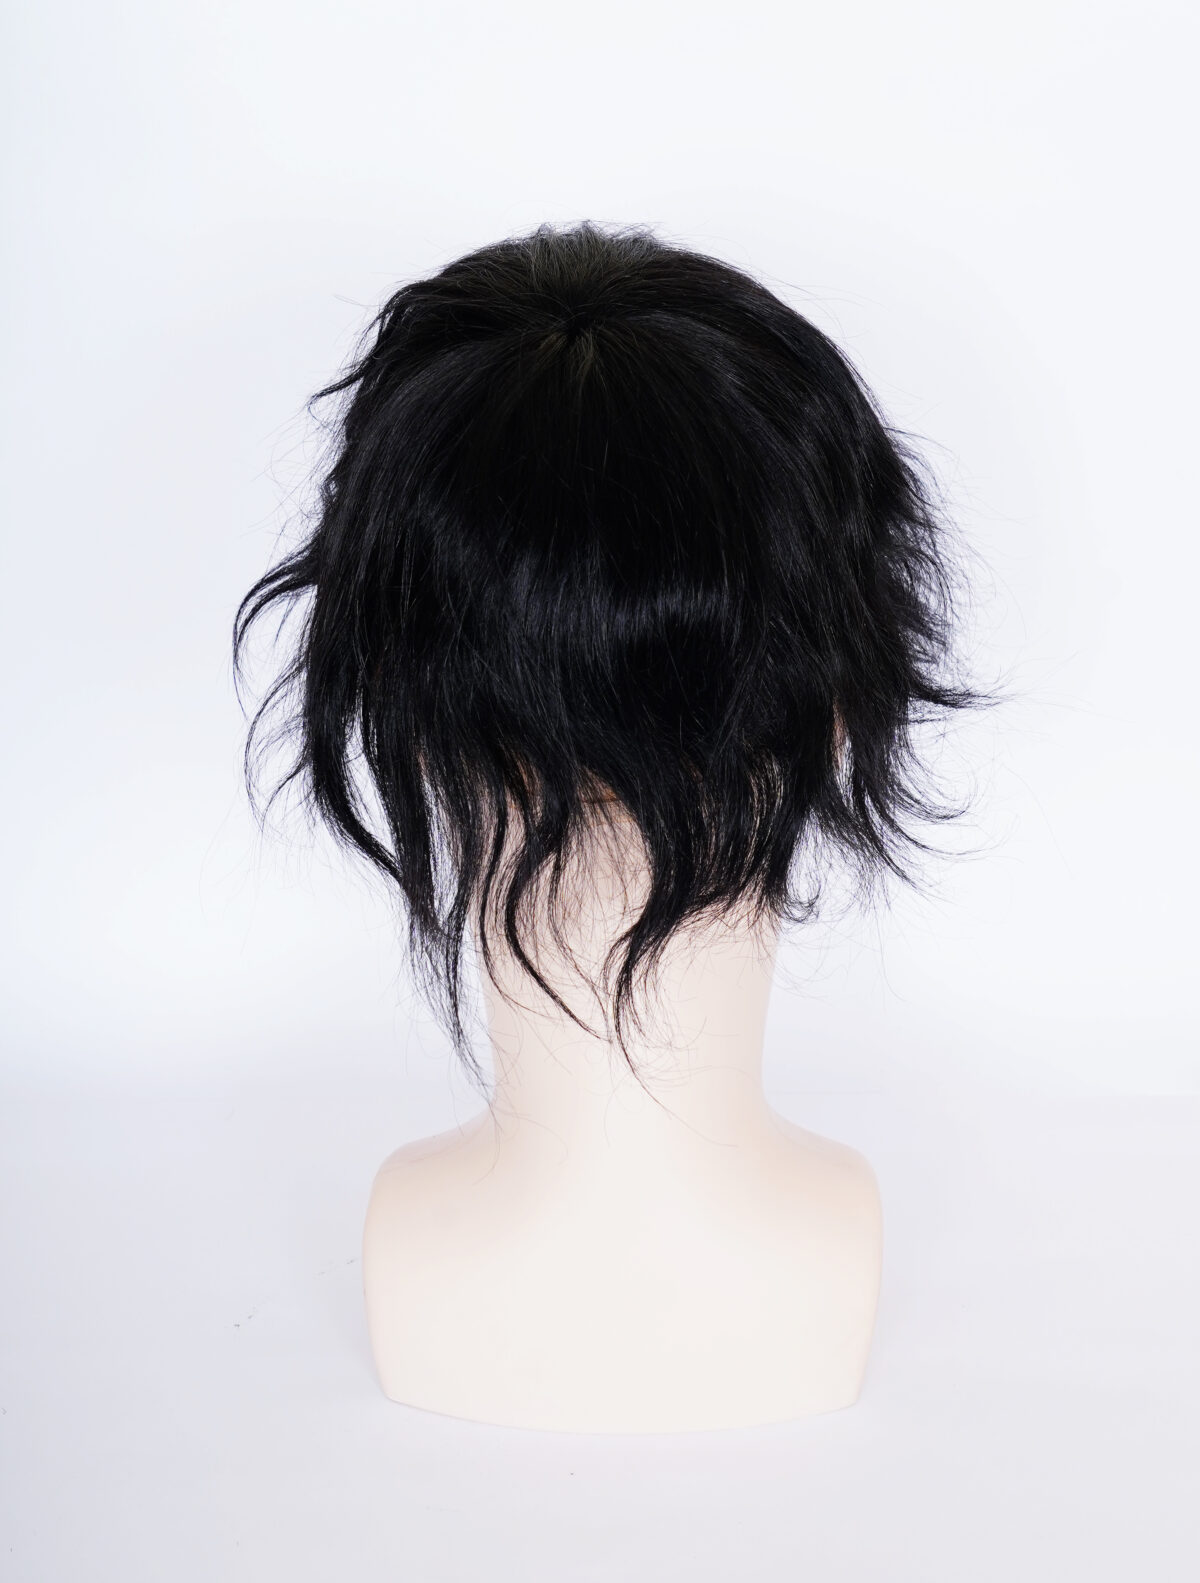 Do you think wearing a hair wig enhances your personality?